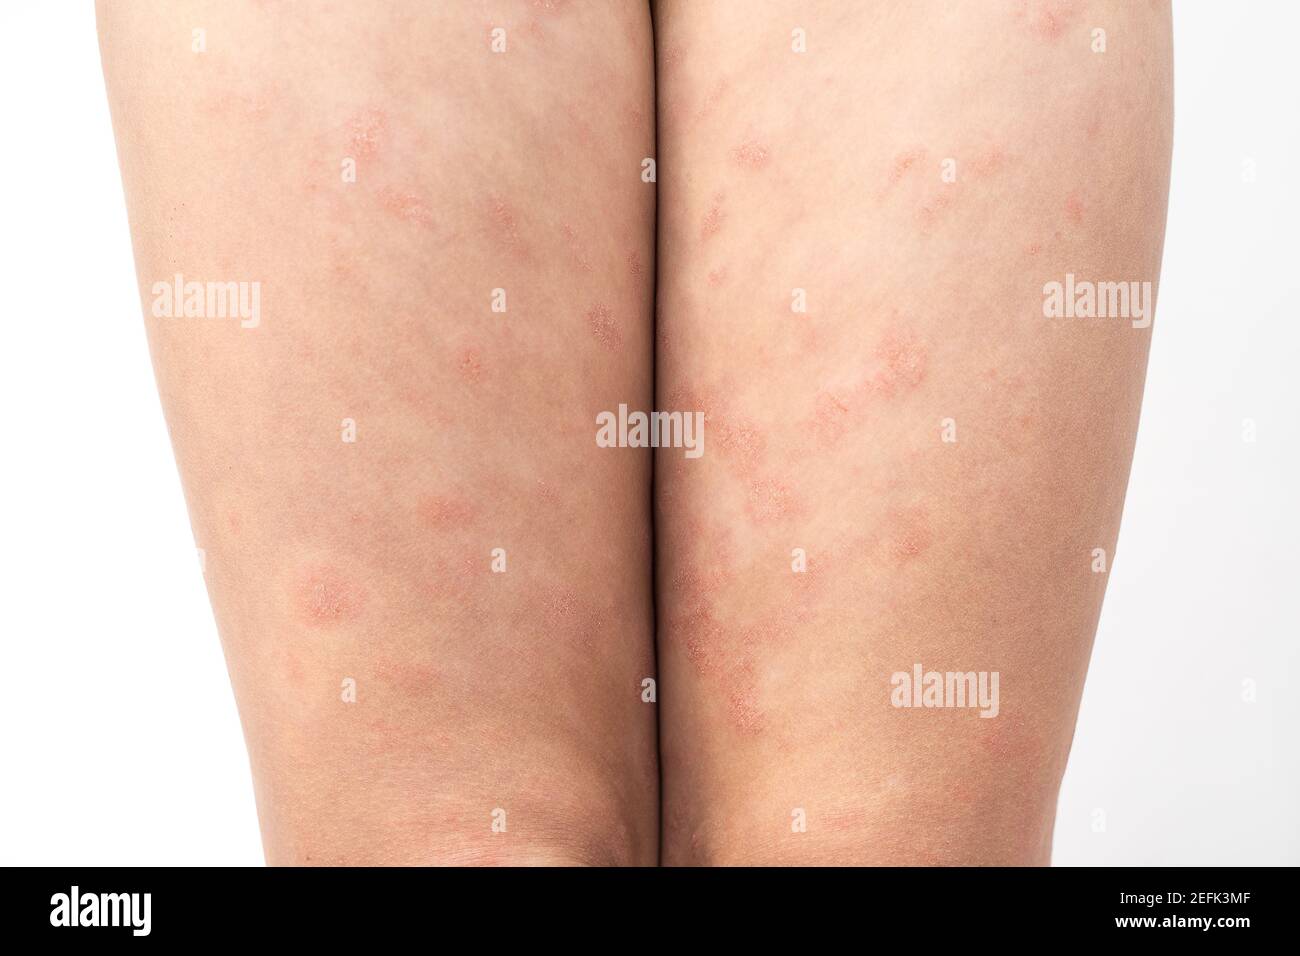 Acute atopic dermatitis on the feet of a child is a dermatological skin disease. Large, red, inflamed, scaly rash on the legs. Legs of a teenager with Stock Photo